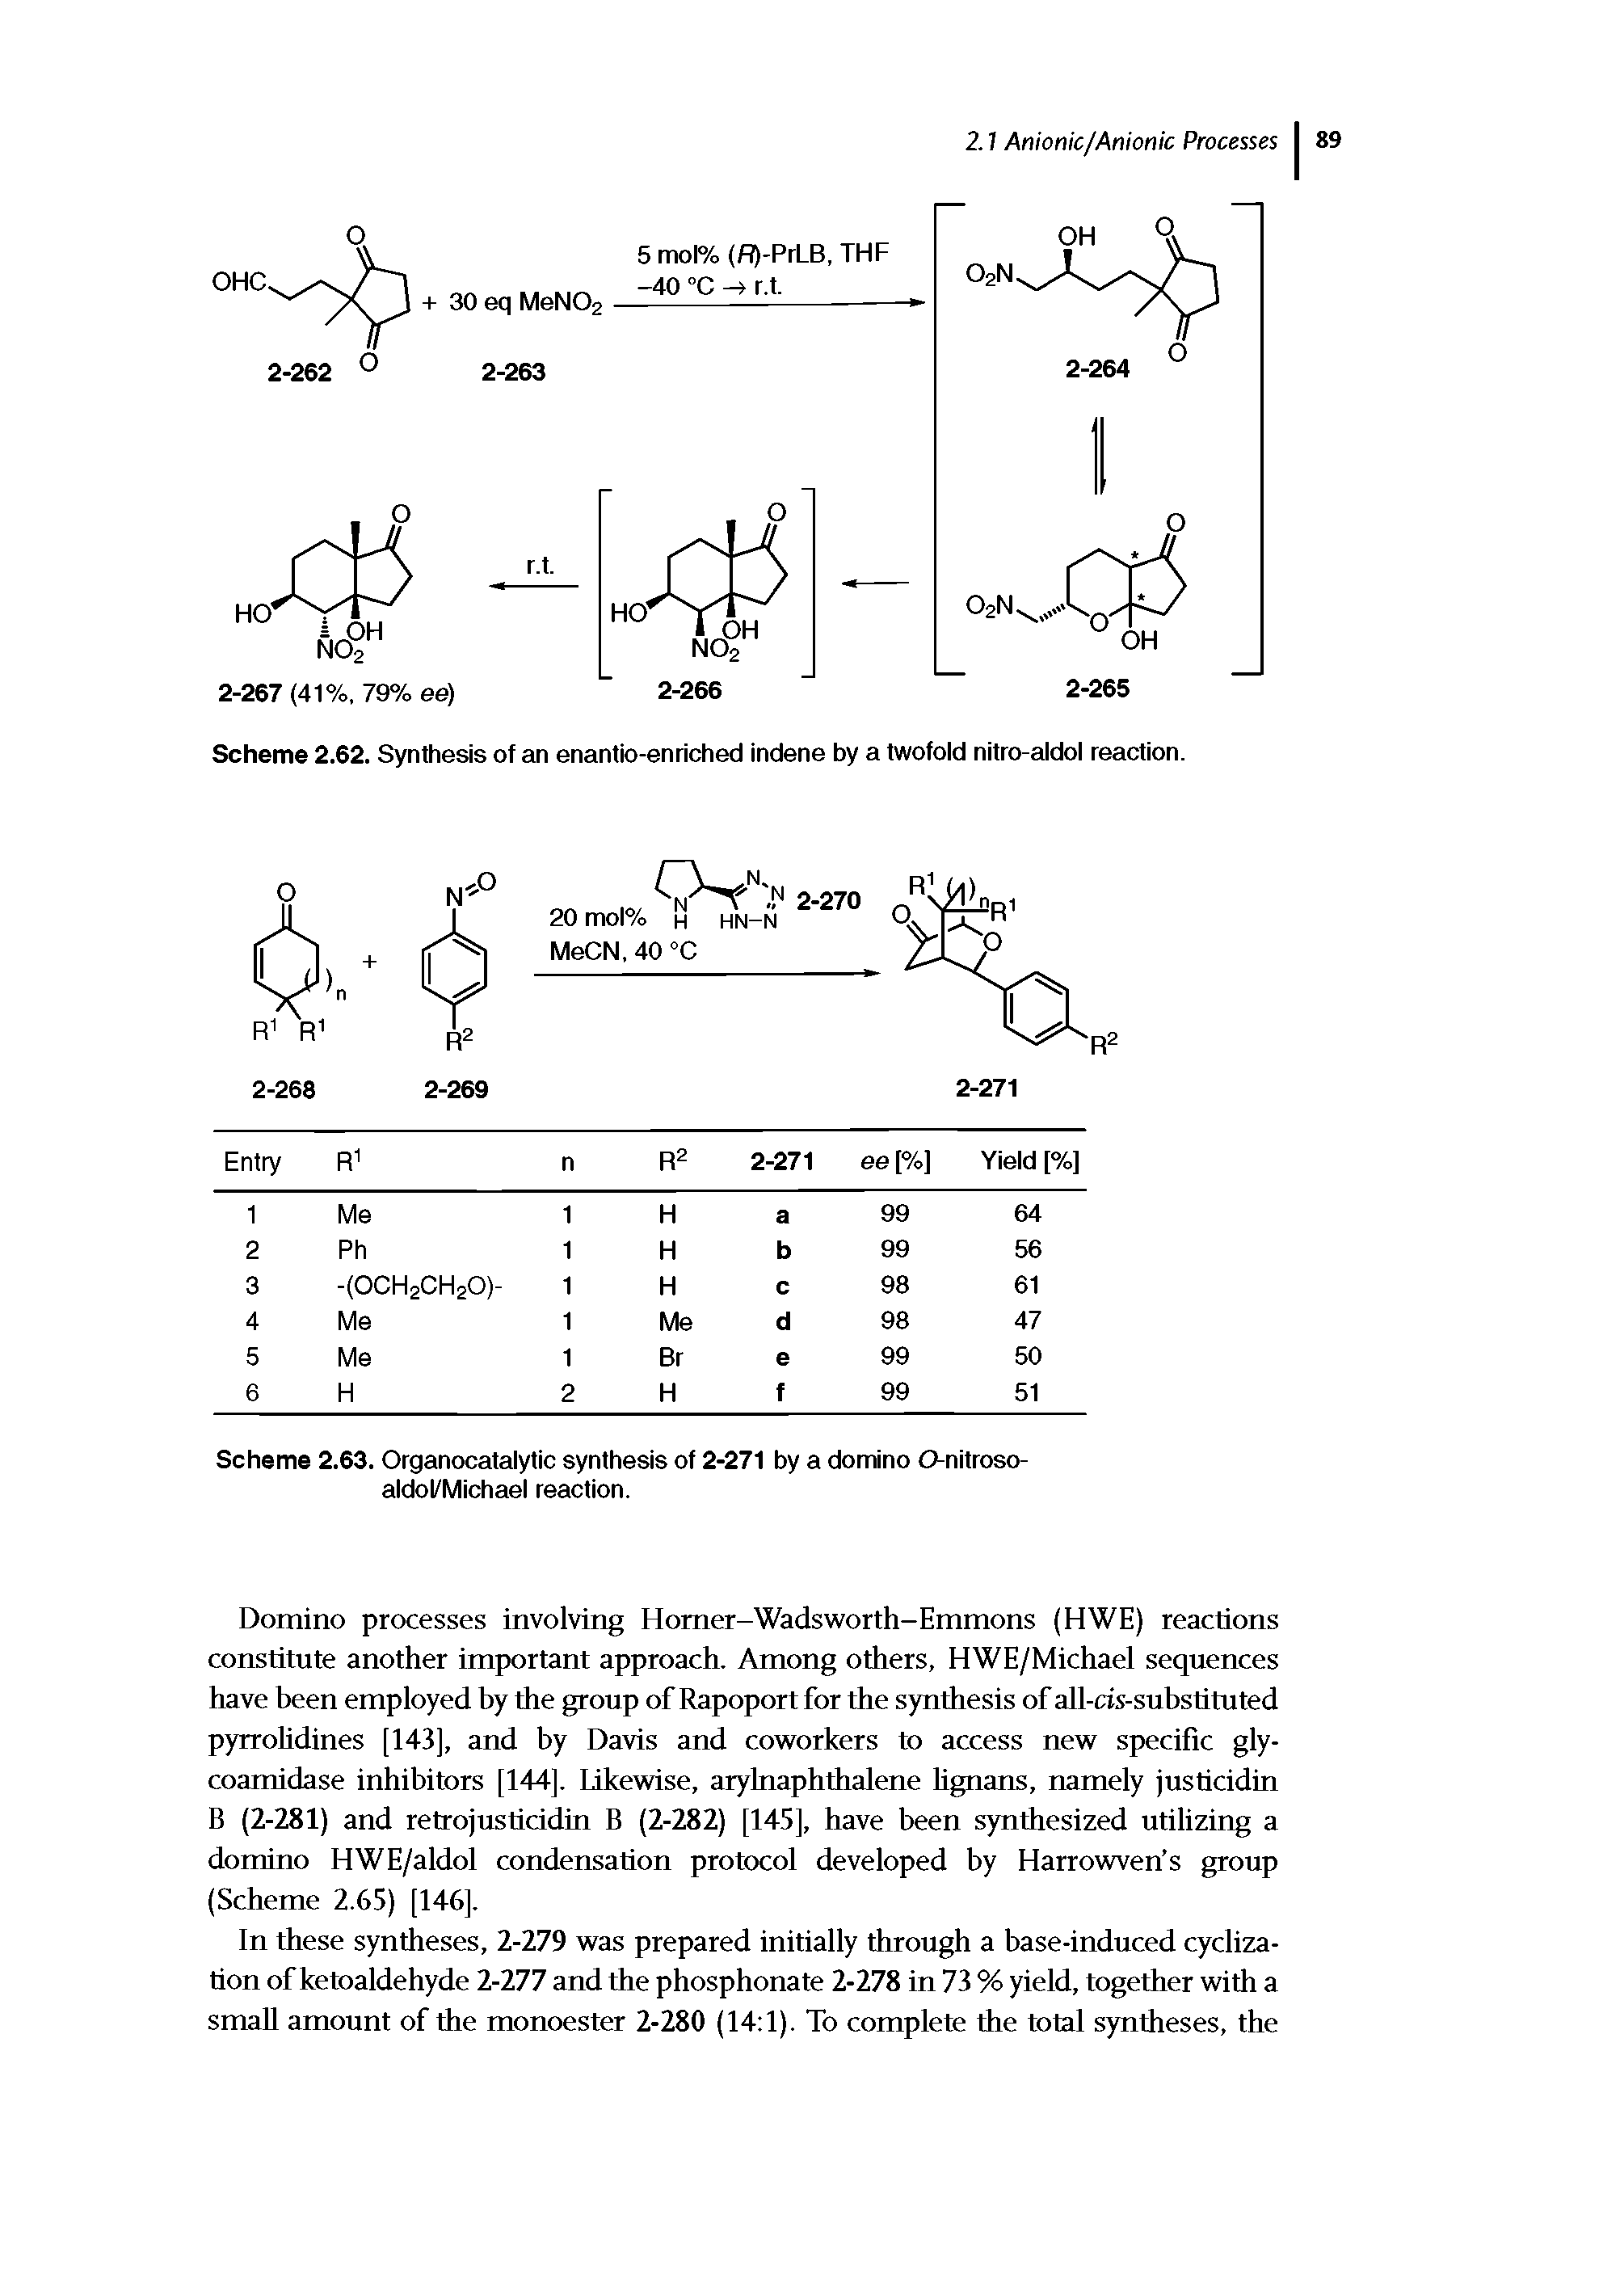 Scheme 2.62. Synthesis of an enantio-enriched indene by a twofold nitro-aldol reaction.